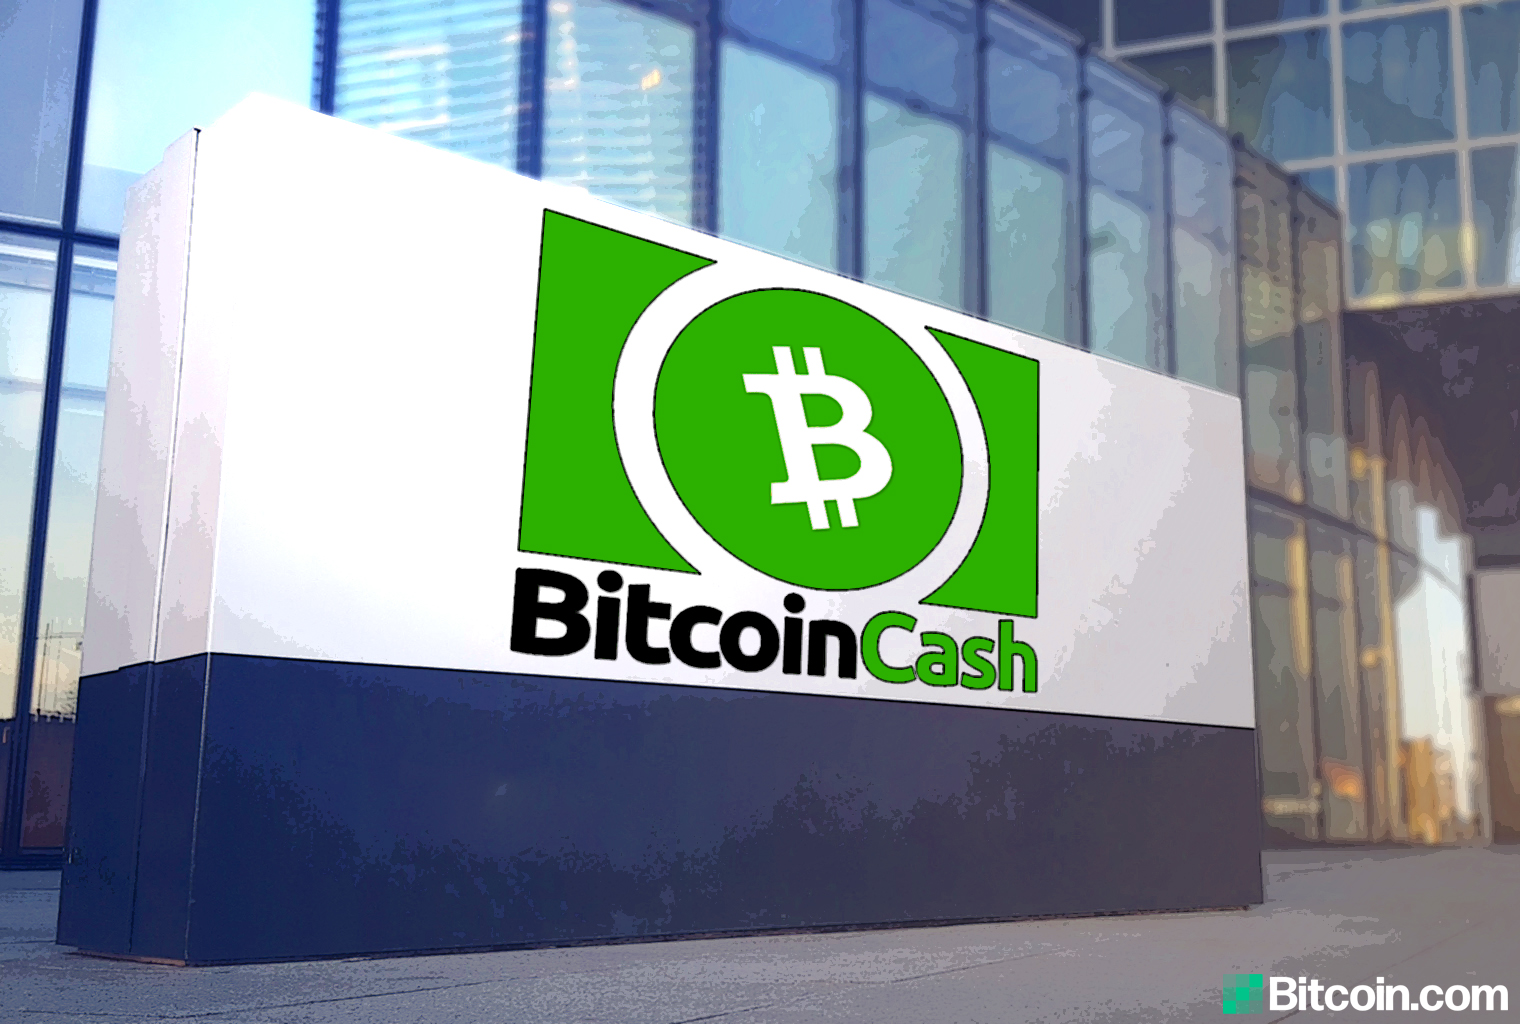 Plans to Build $50M Bitcoin Cash Tech Park in North Queensland Revealed